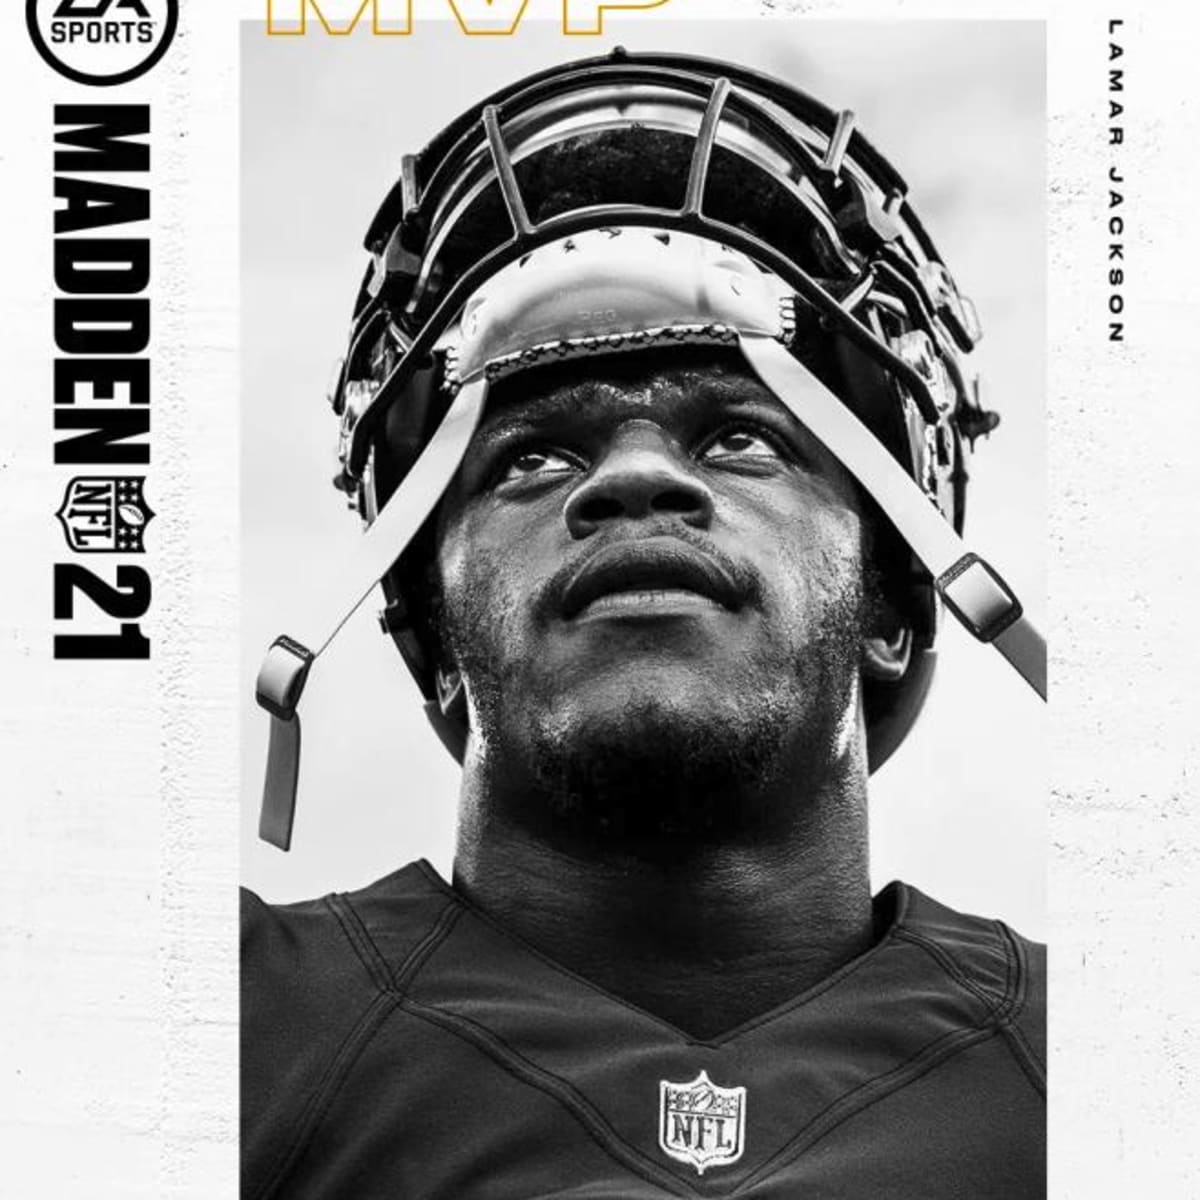 Reigning NFL MVP Lamar Jackson will appear on Madden 21 cover